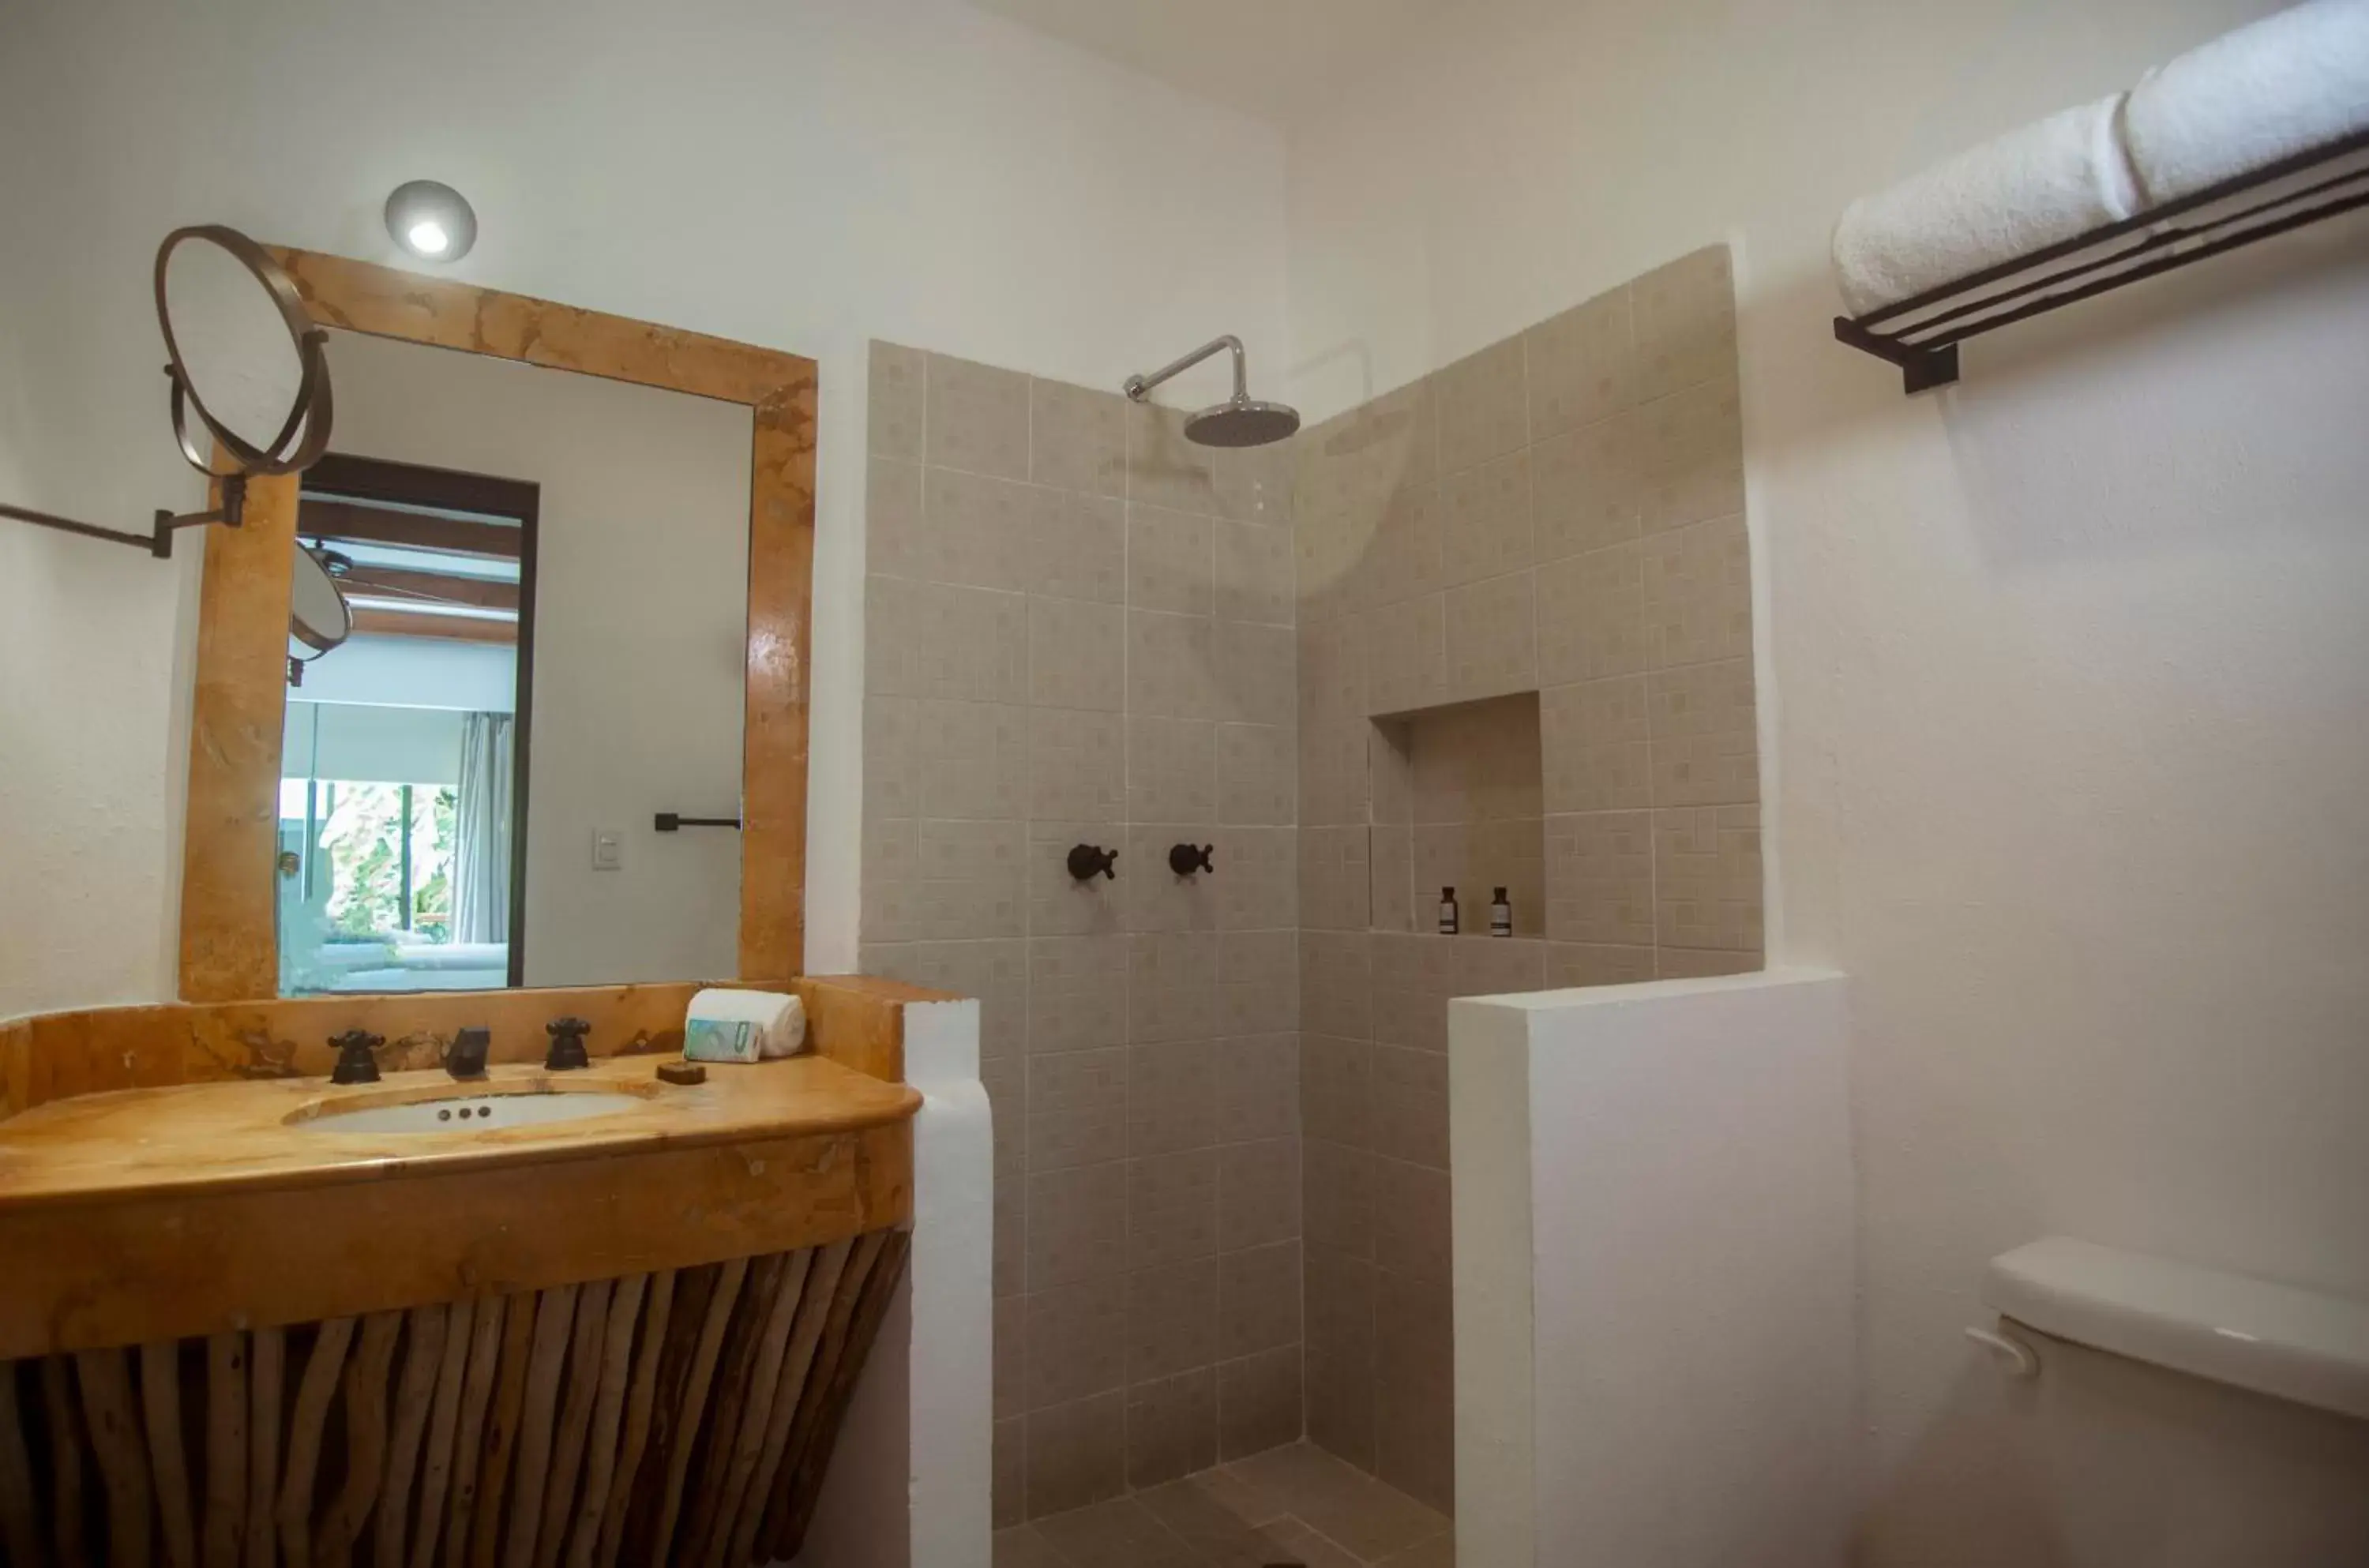 Shower, Bathroom in "5th AVENUE" Banana Boutique Hotel "by BFH"